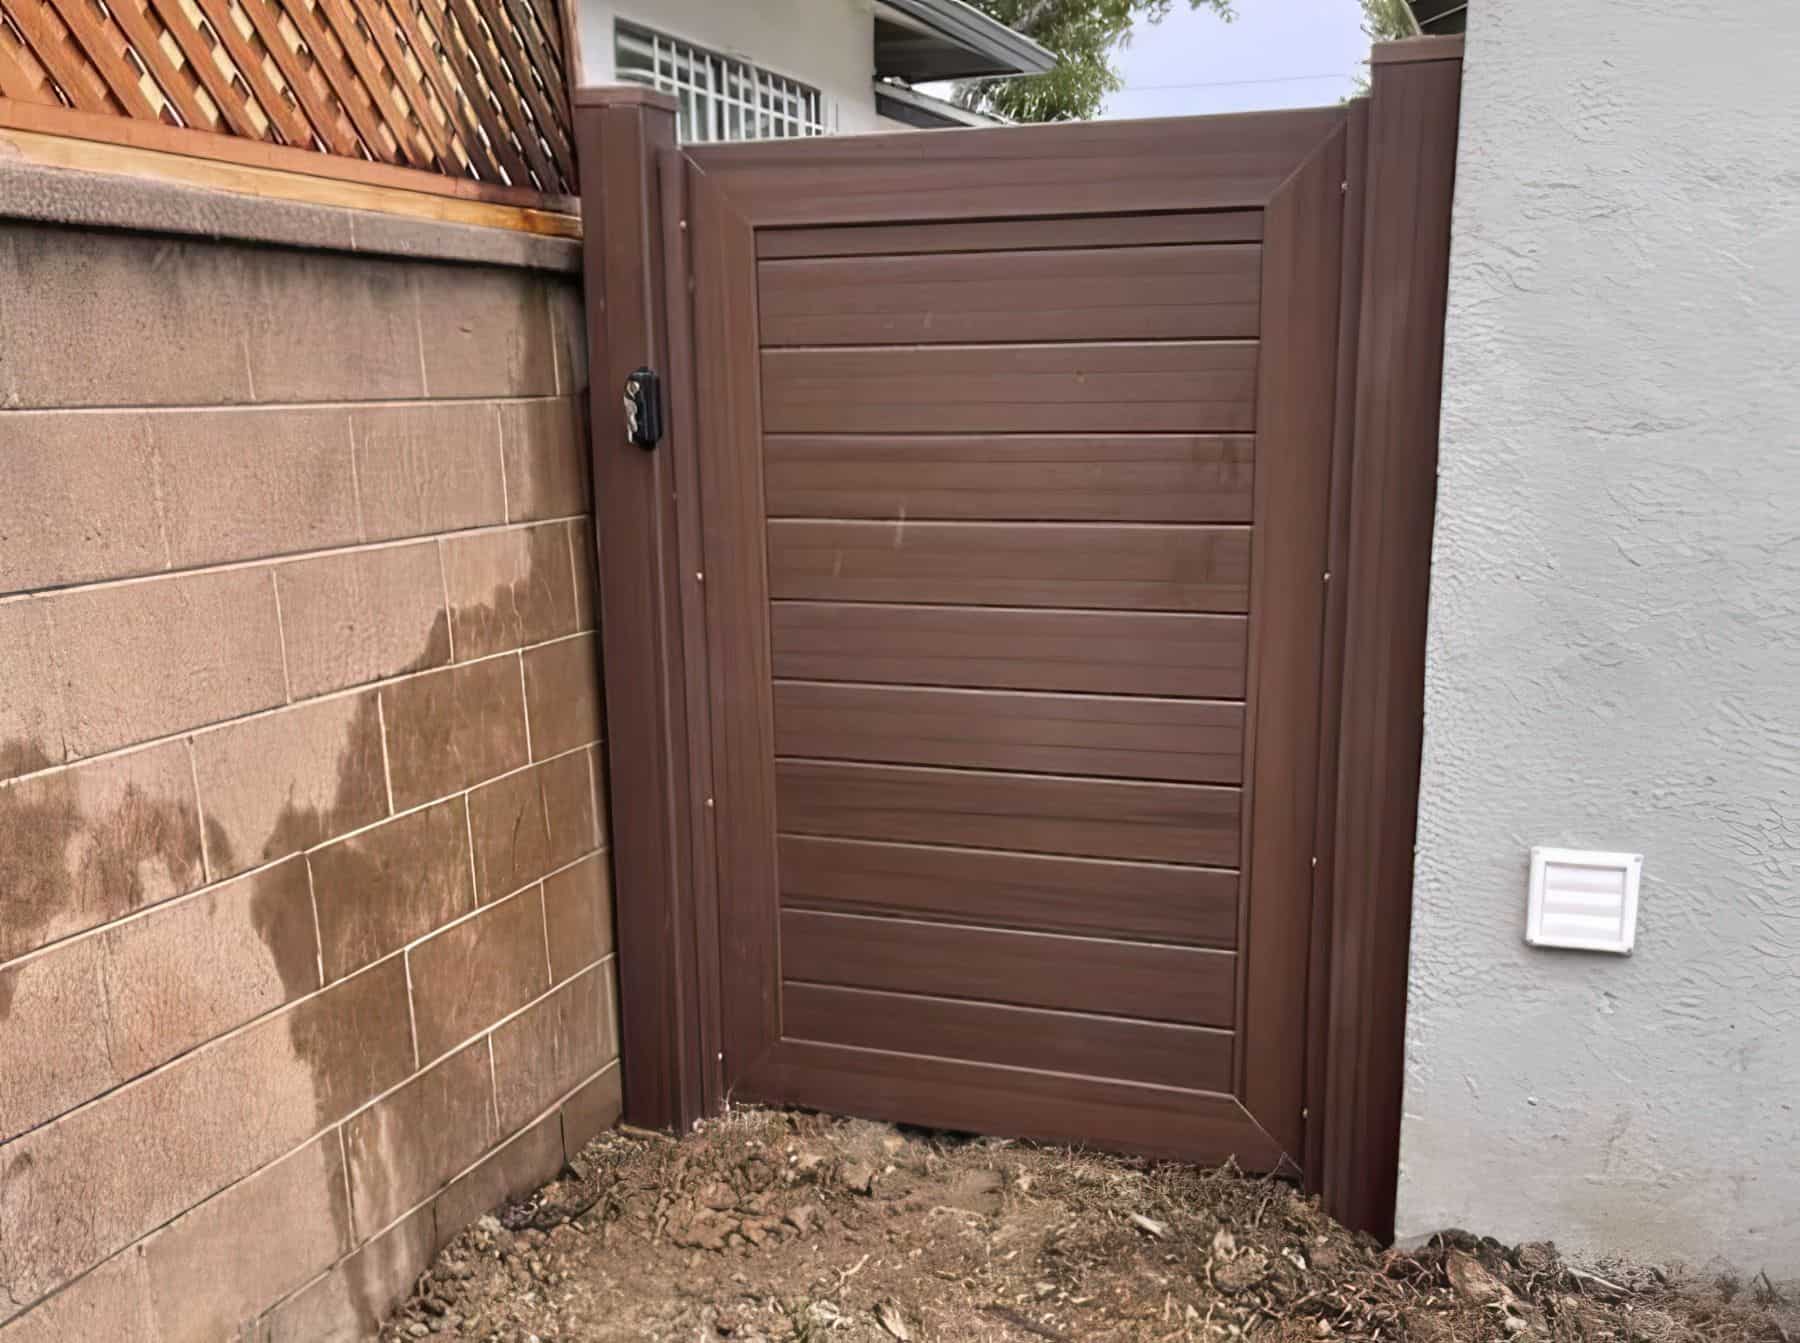 Pristine brown vinyl single side gate between olive white wall and concrete brown wall with wooden trellis on top.